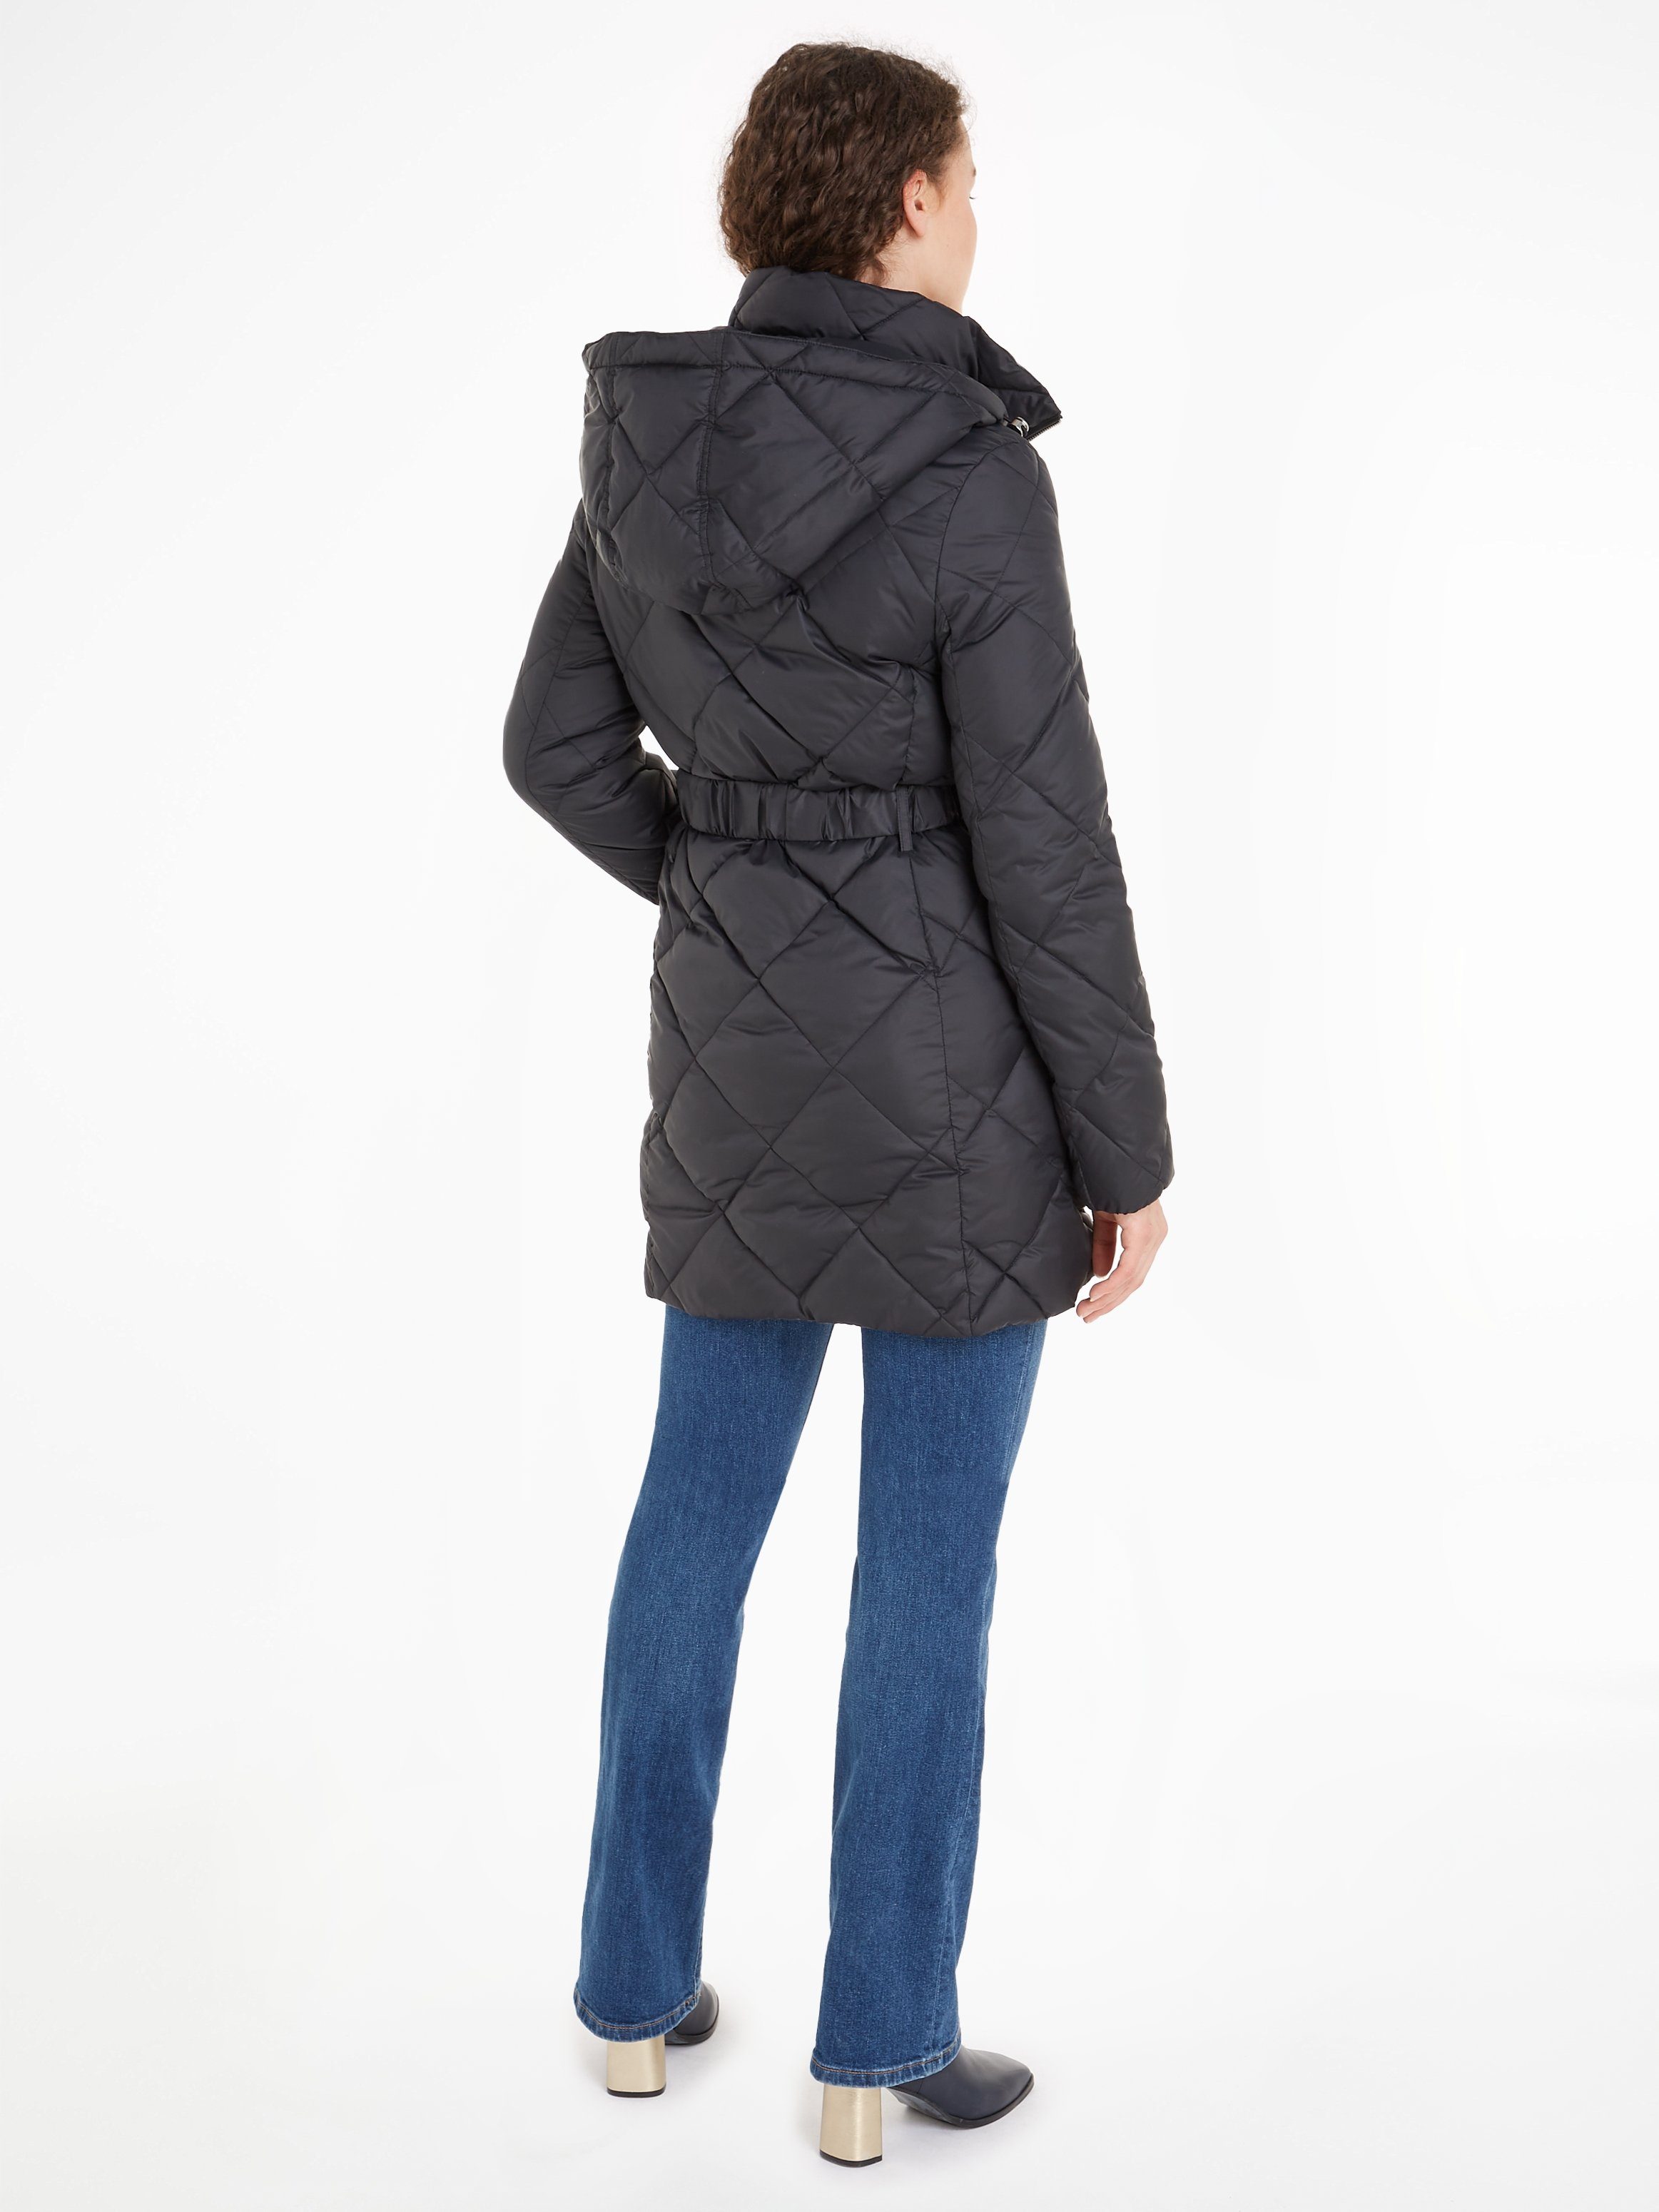 Tommy Hilfiger Steppmantel ELEVATED BELTED QUILTED mit abnehmbarer Kapuze COAT